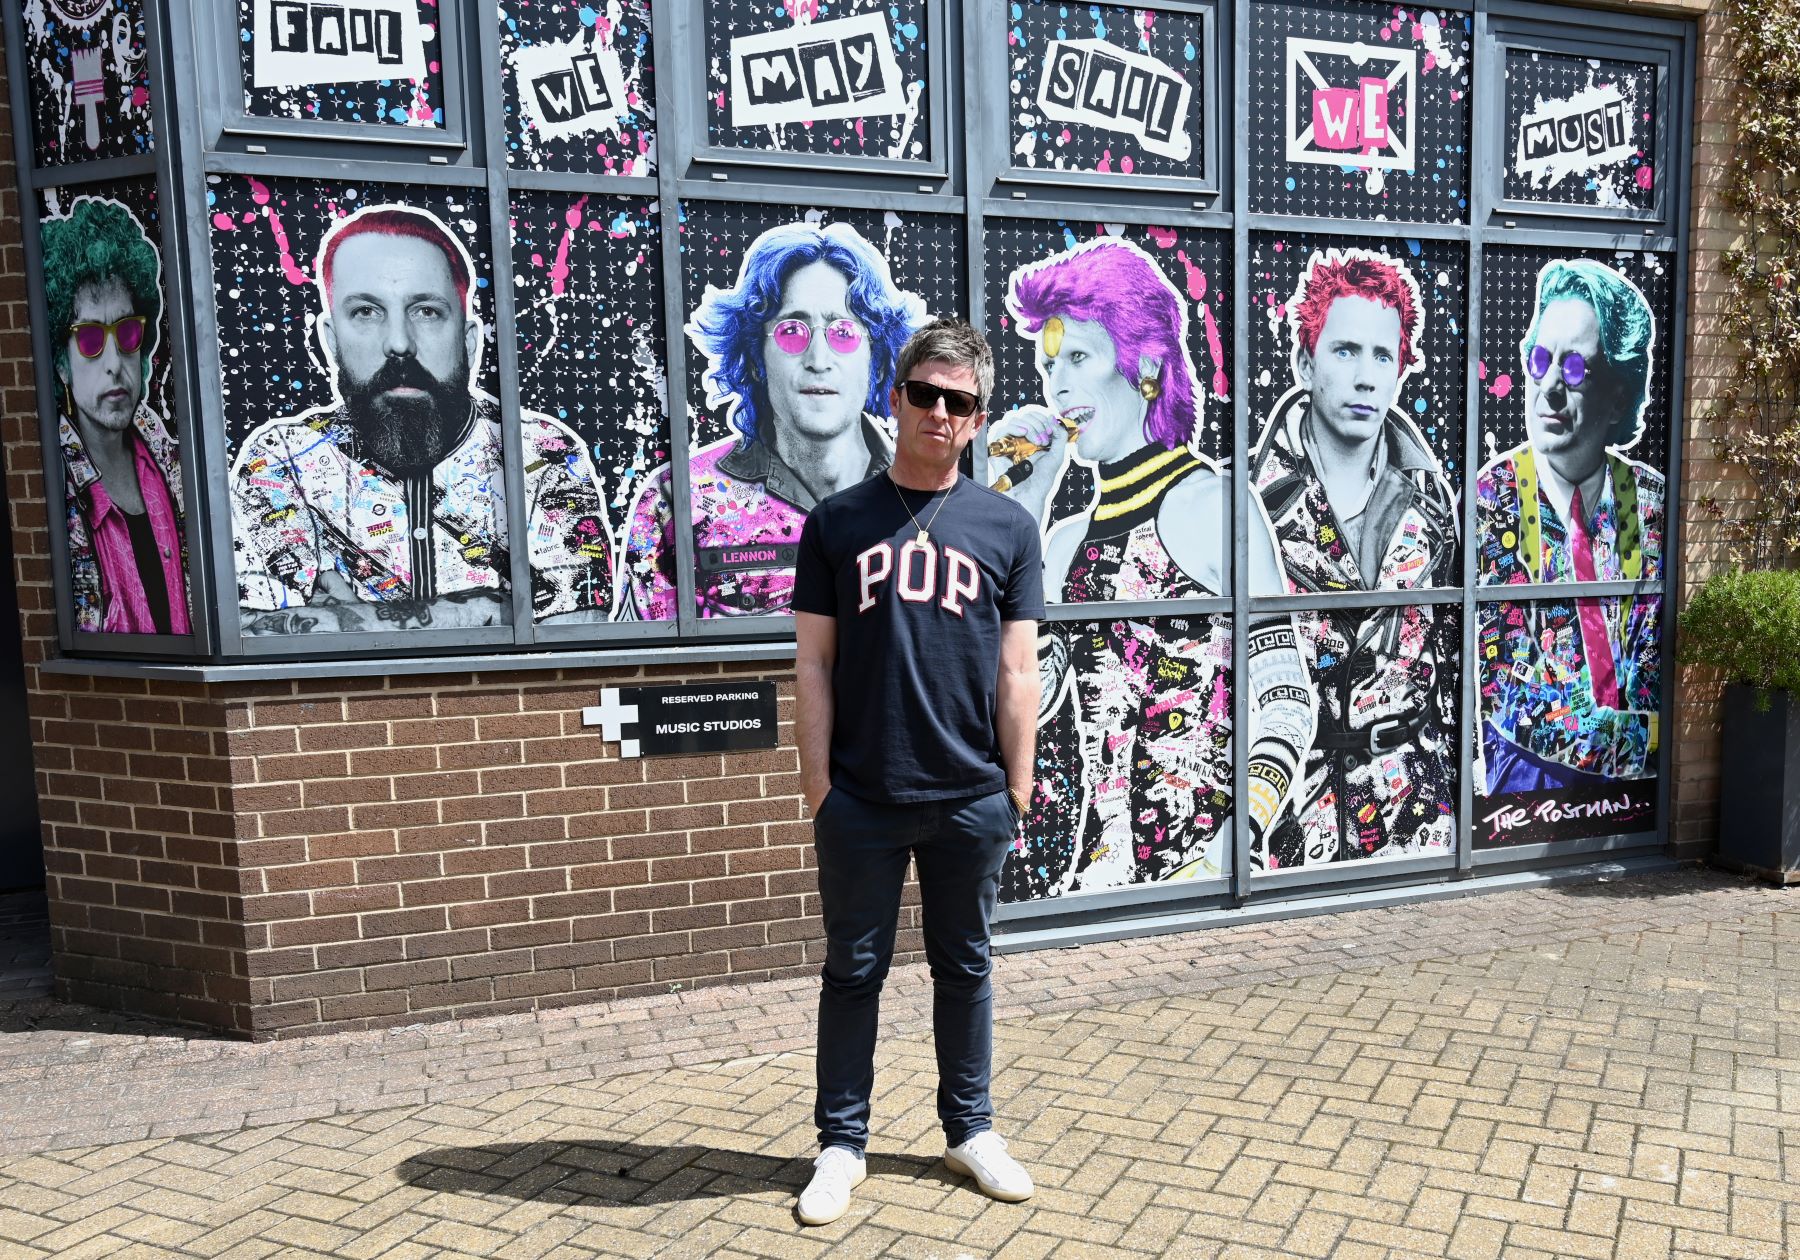 Noel Gallagher posing at completed The Postman art mural in London, England